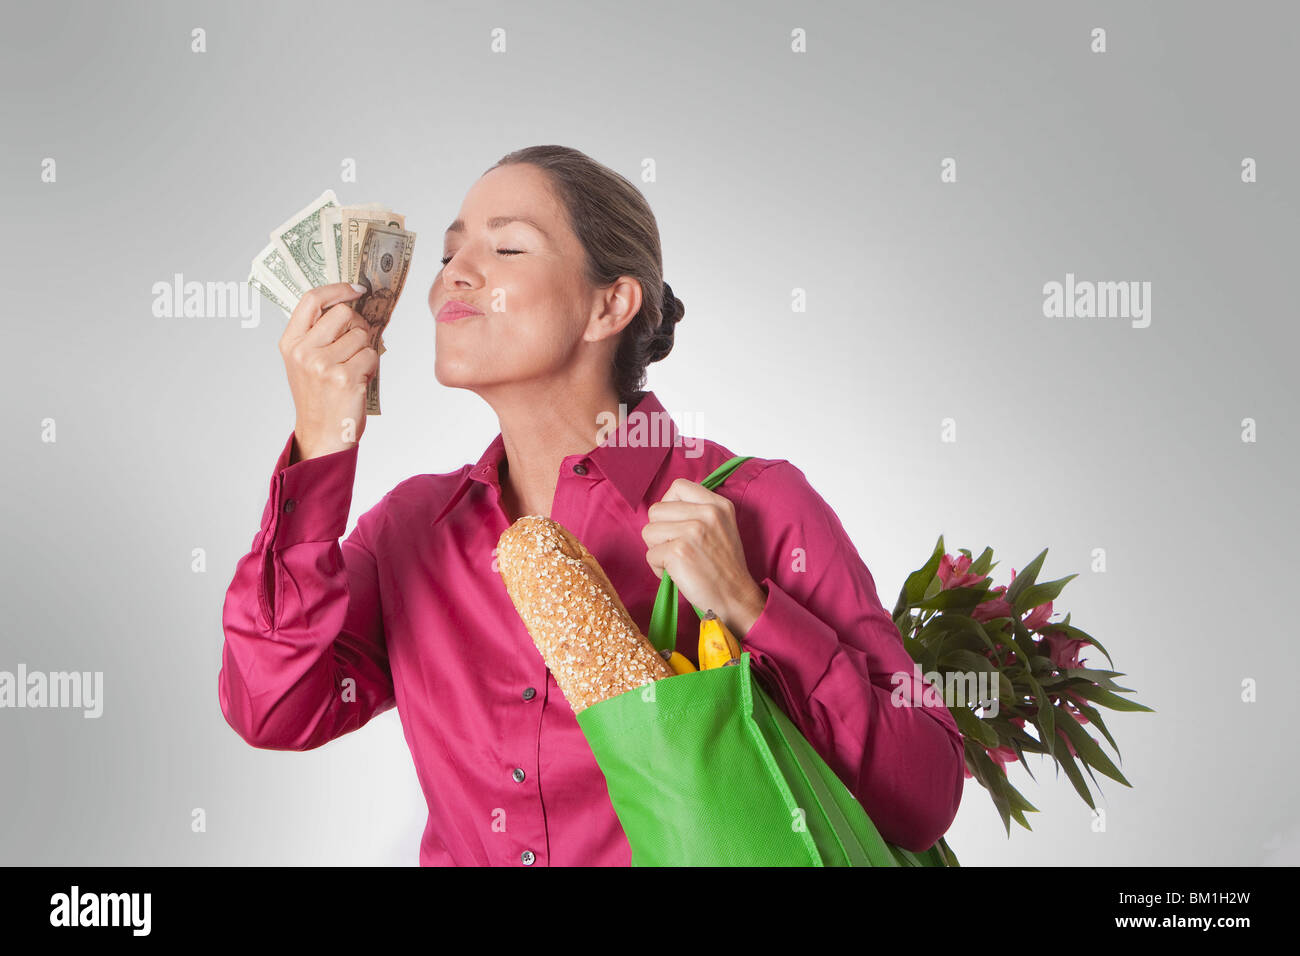 Woman holding a shopping bag of groceries and currency notes Stock Photo